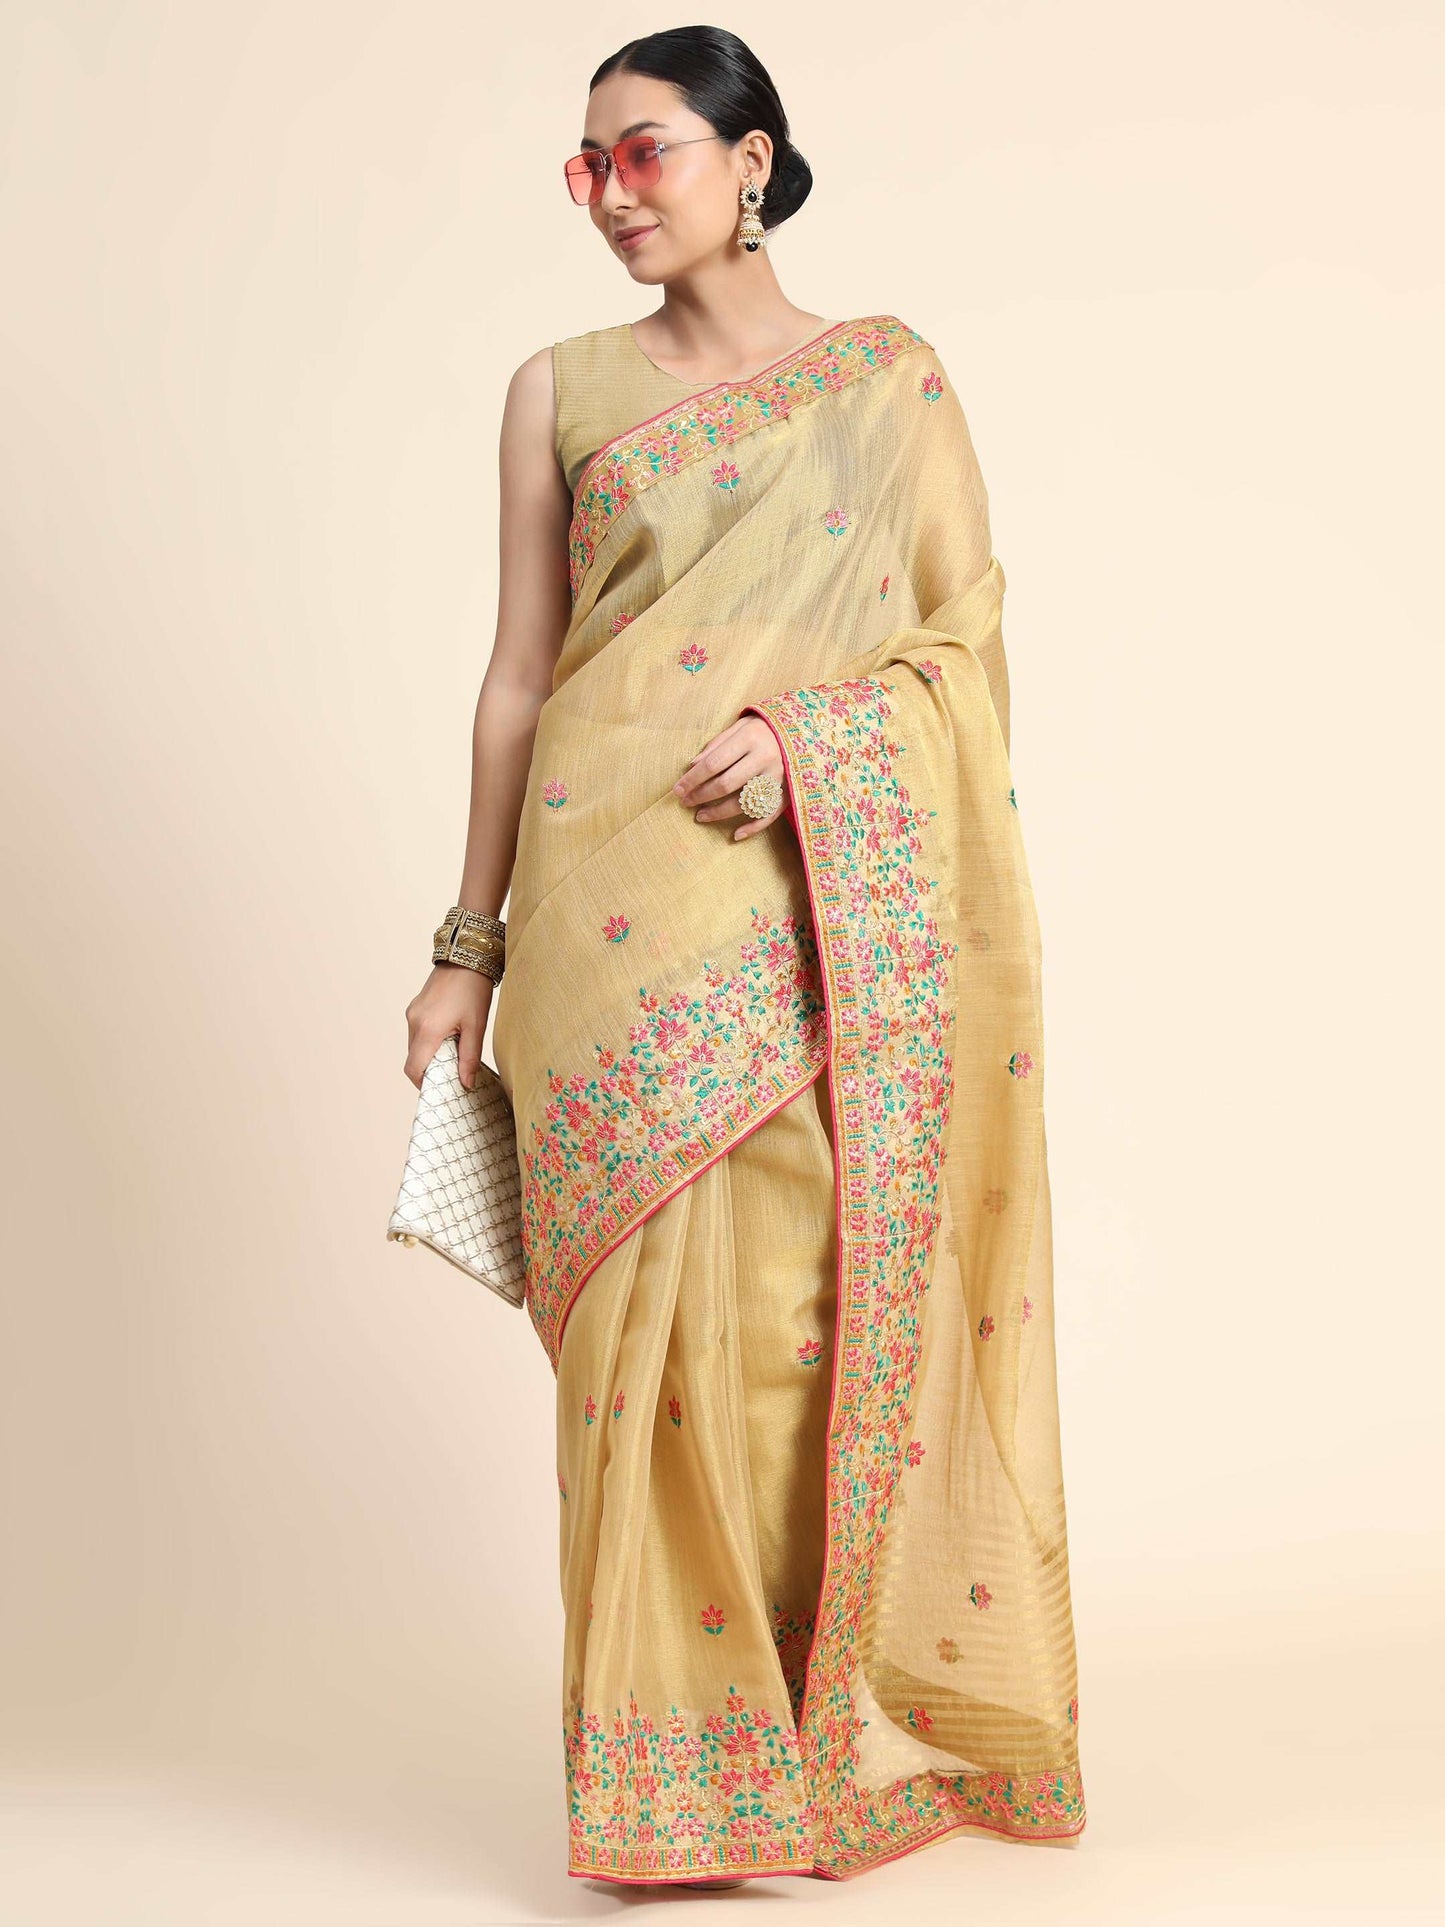 Gold Tissue Embroidered Panel Work Saree Chickoo